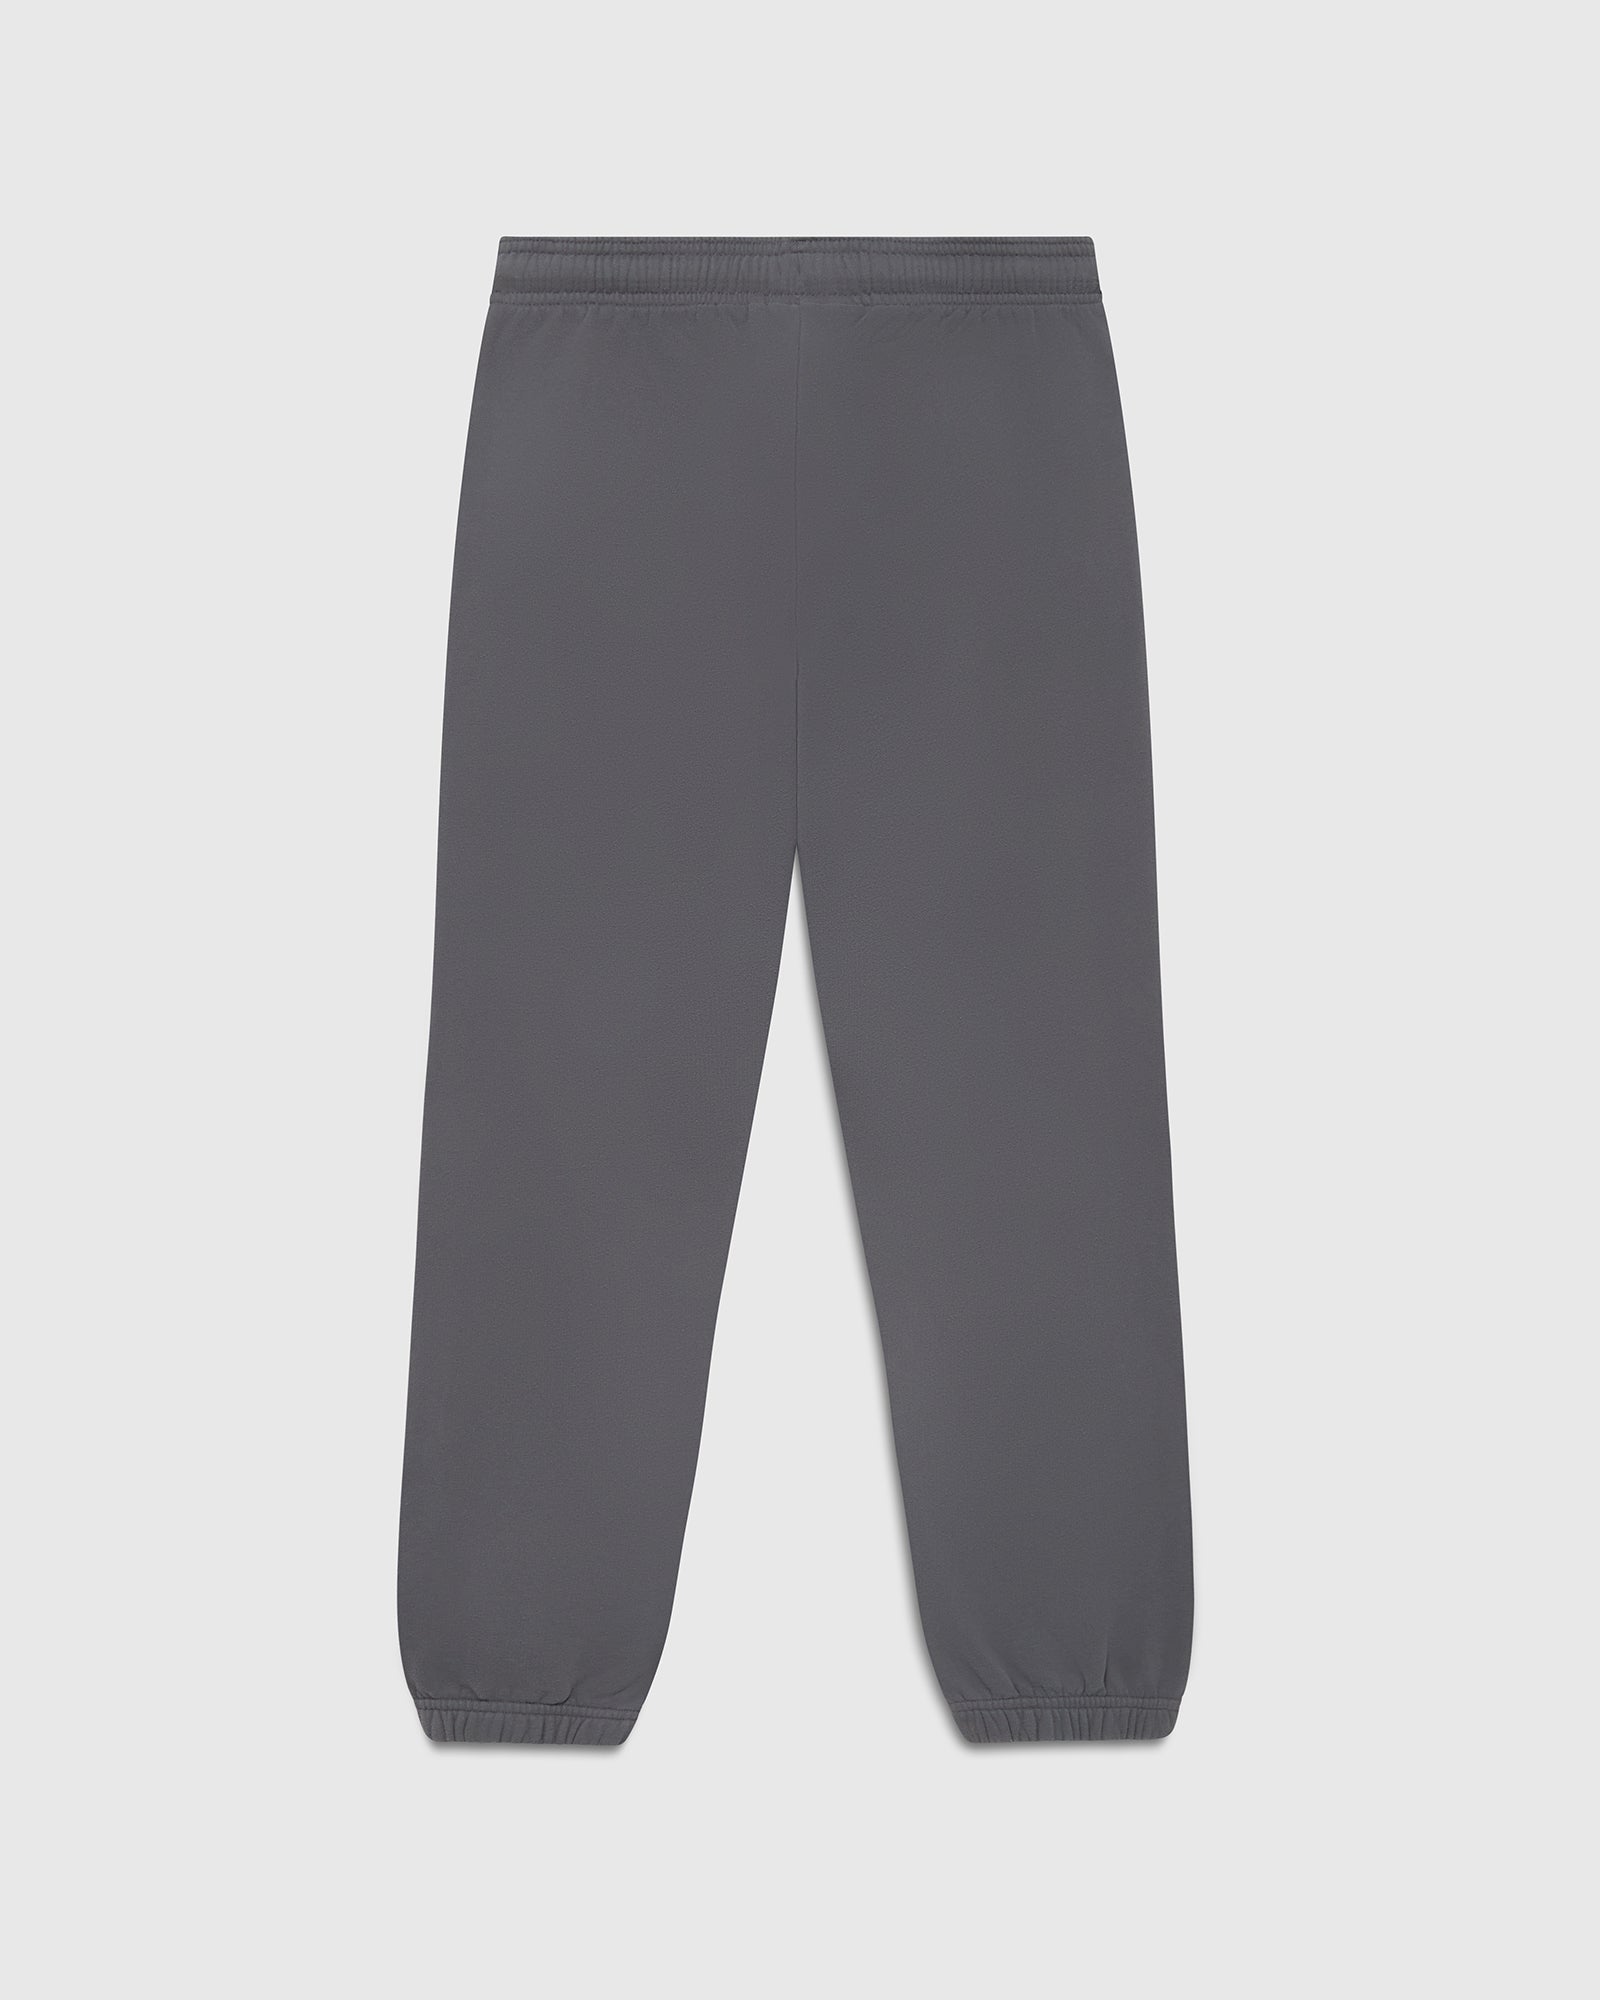 Relaxed Fit Sweatpant - Charcoal